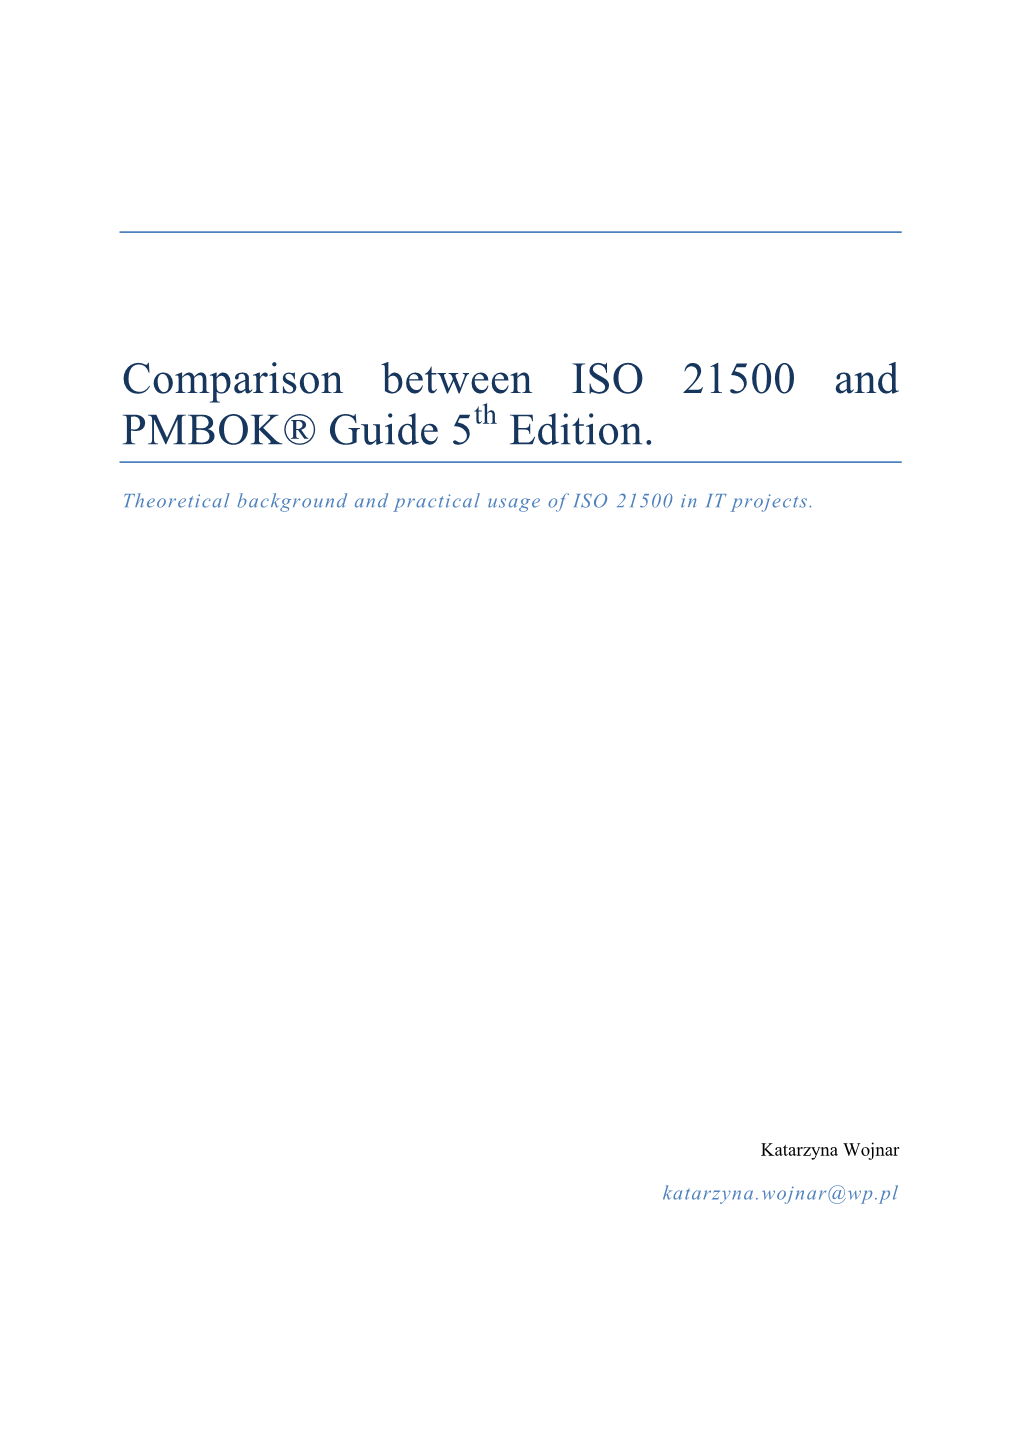 Comparison Between ISO 21500 and PMBOK® Guide 5 Edition